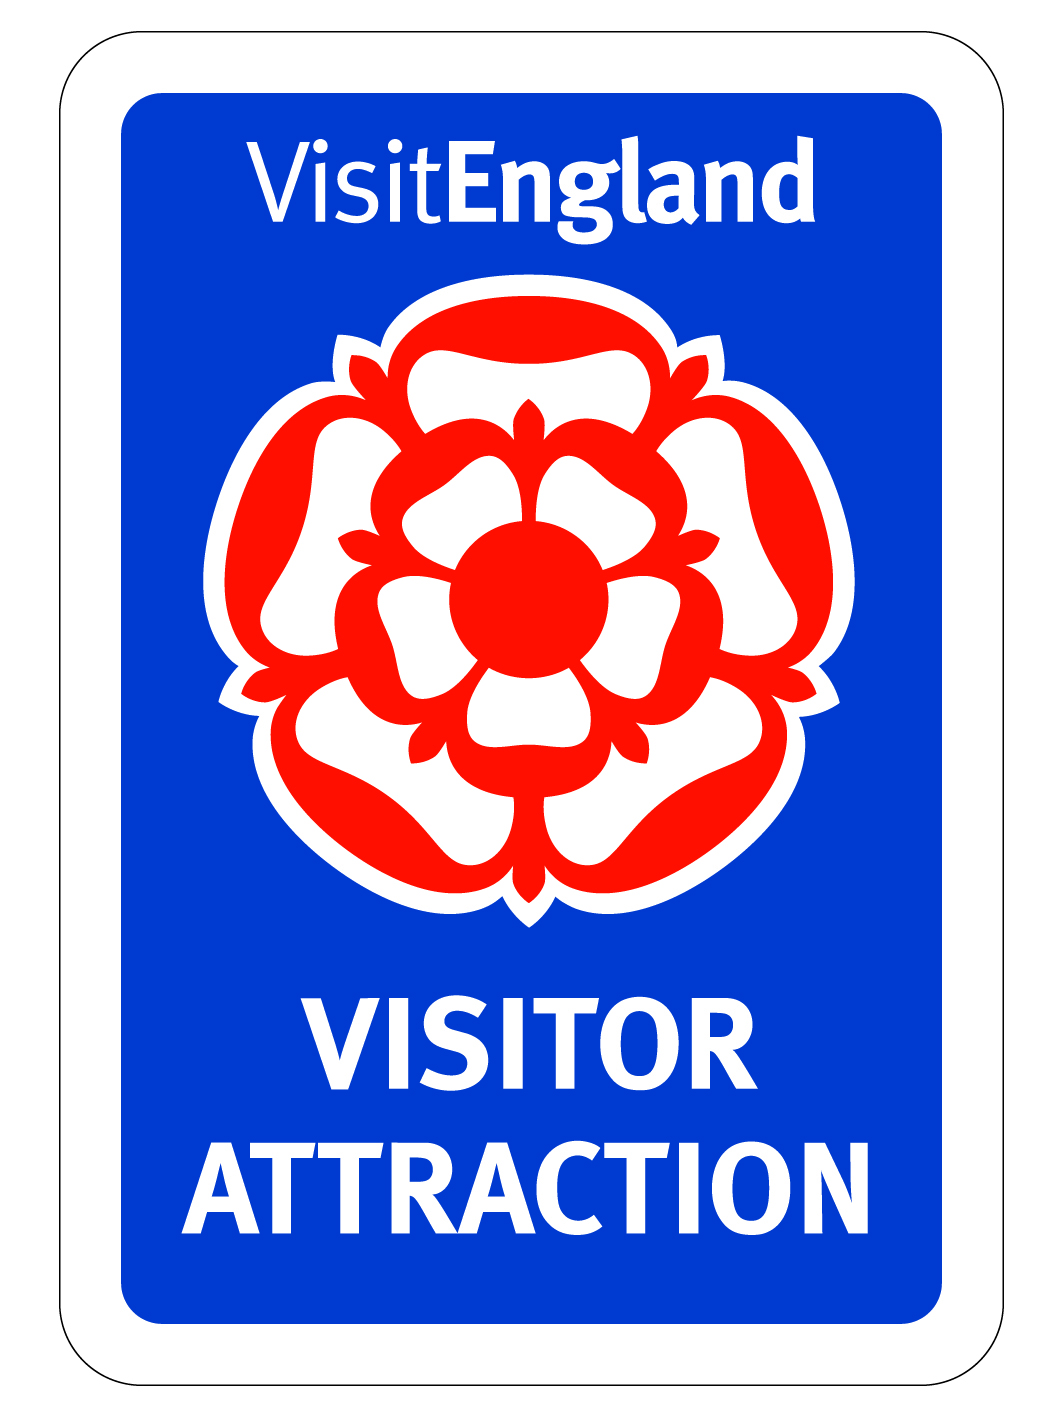 A blue sign with a red and white illustrated rose